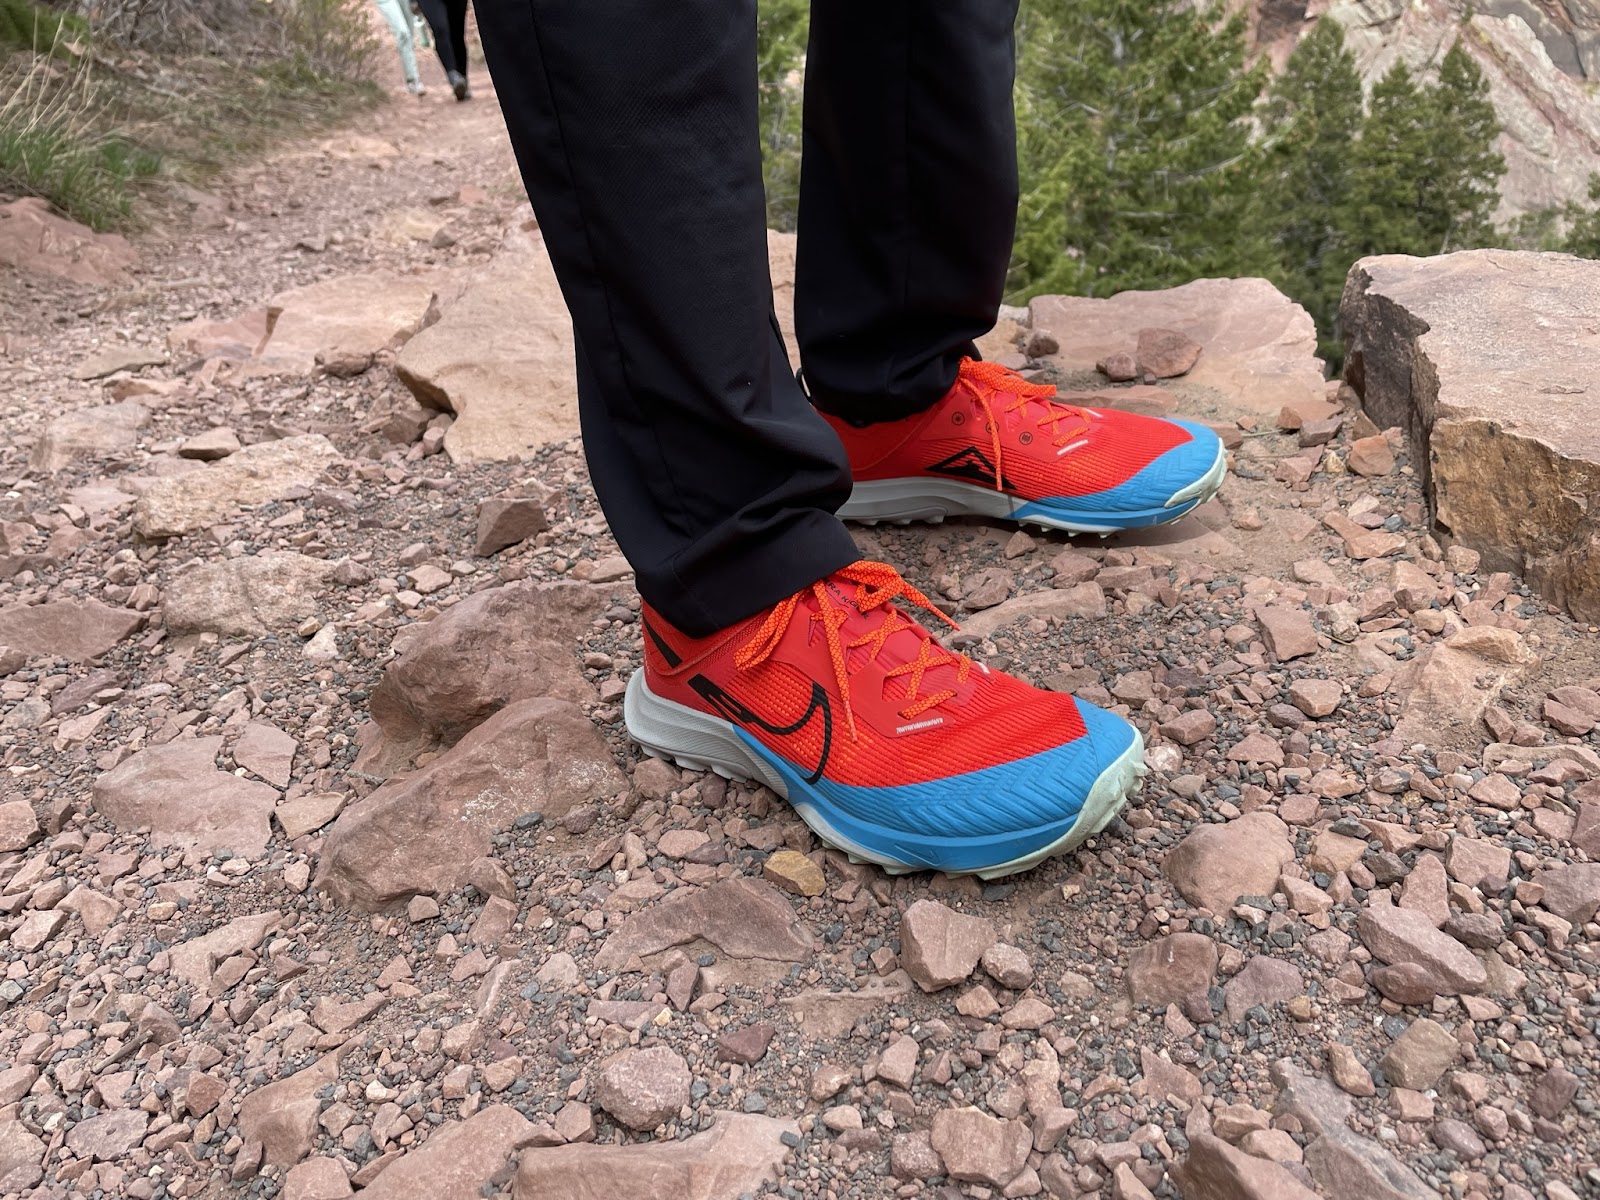 Road Trail Run: Nike Air Zoom Kiger 8 Review: A firm, responsive trail runner. 12 Comparisons